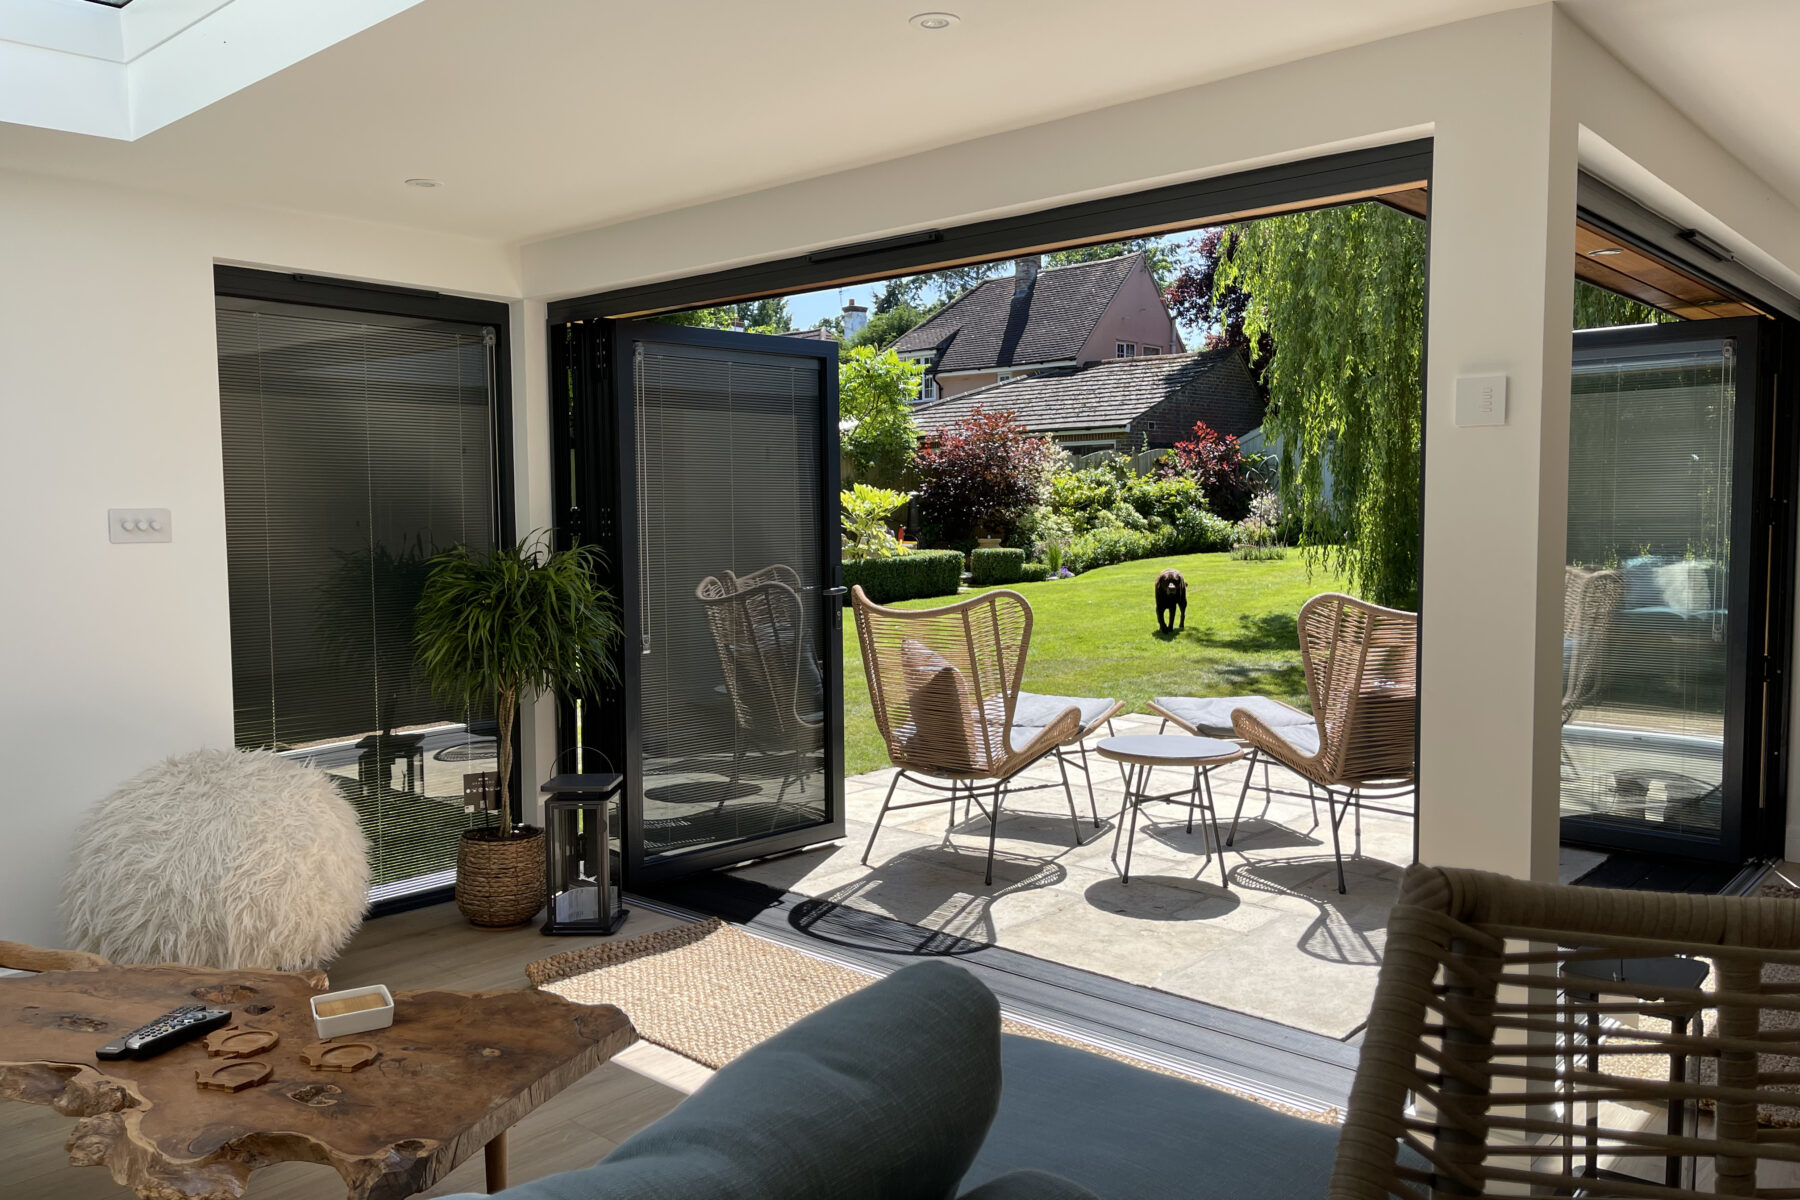 Interior of a Vivid Green furnished L-shaped garden room with anthracite grey aluminium bi-fold doors with integral blinds opening onto a tiled patio with outdoor furniture and a sunny grass lawn, with the main house visible in the background.